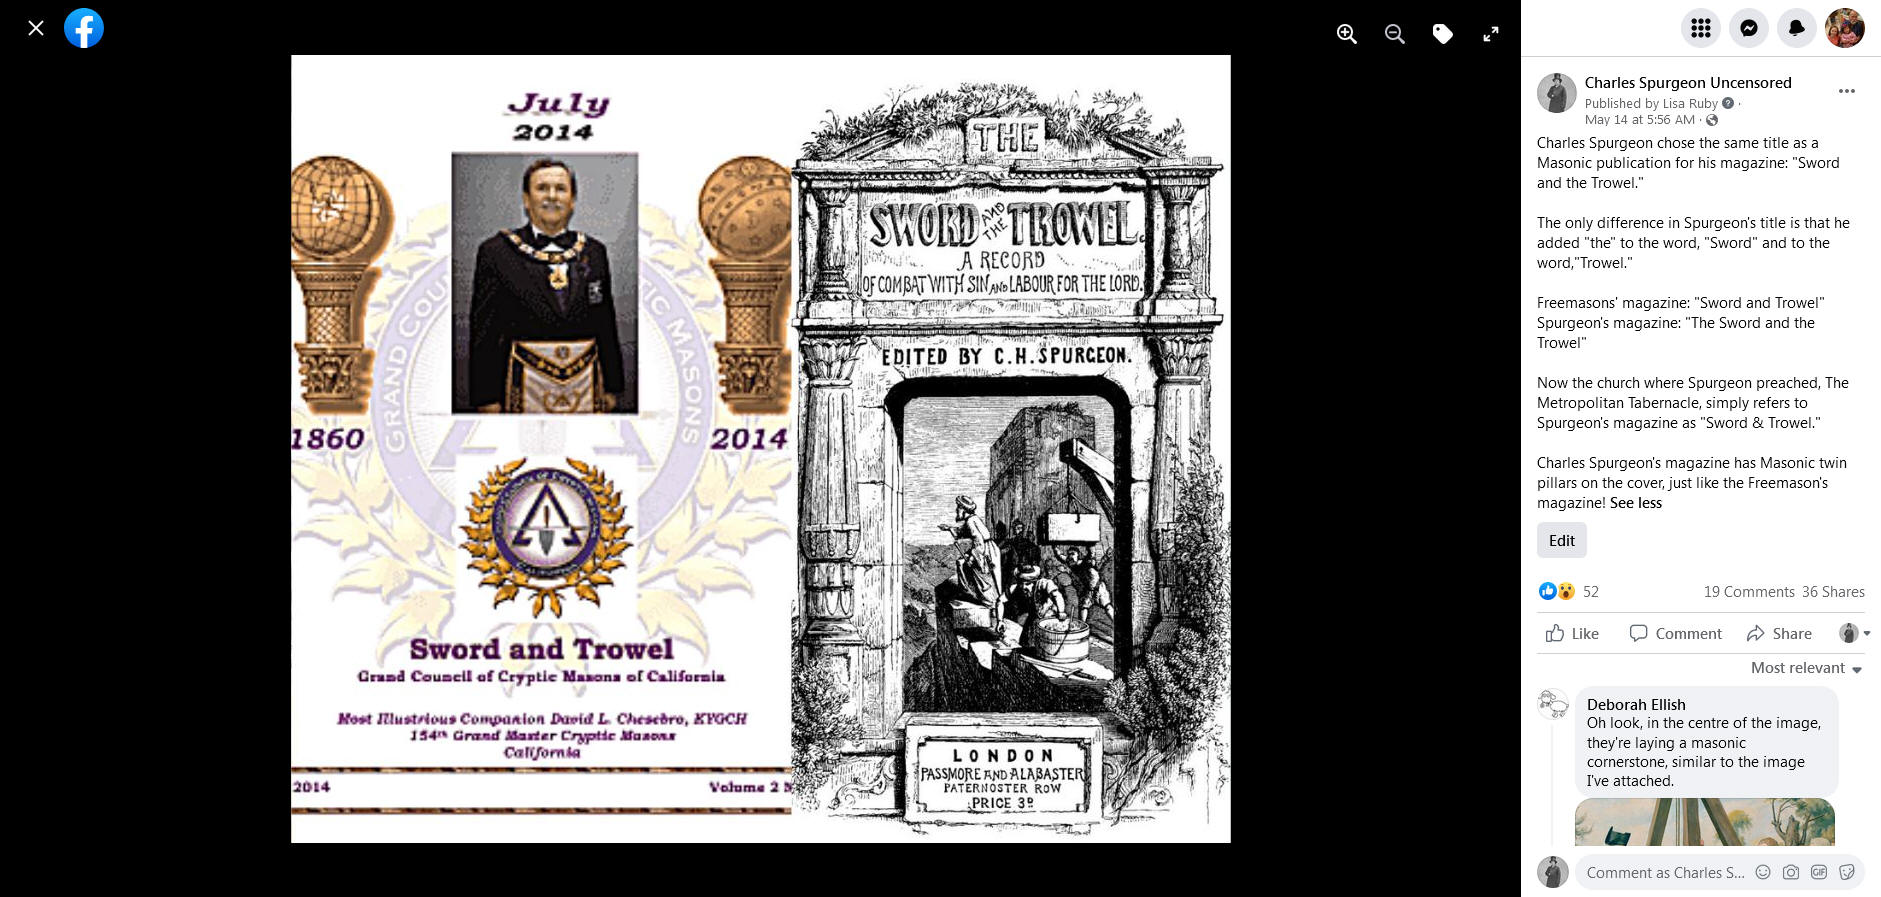 Charles Spurgeon chose the same title as a Masonic publication for his magazine: "Sword and the Trowel